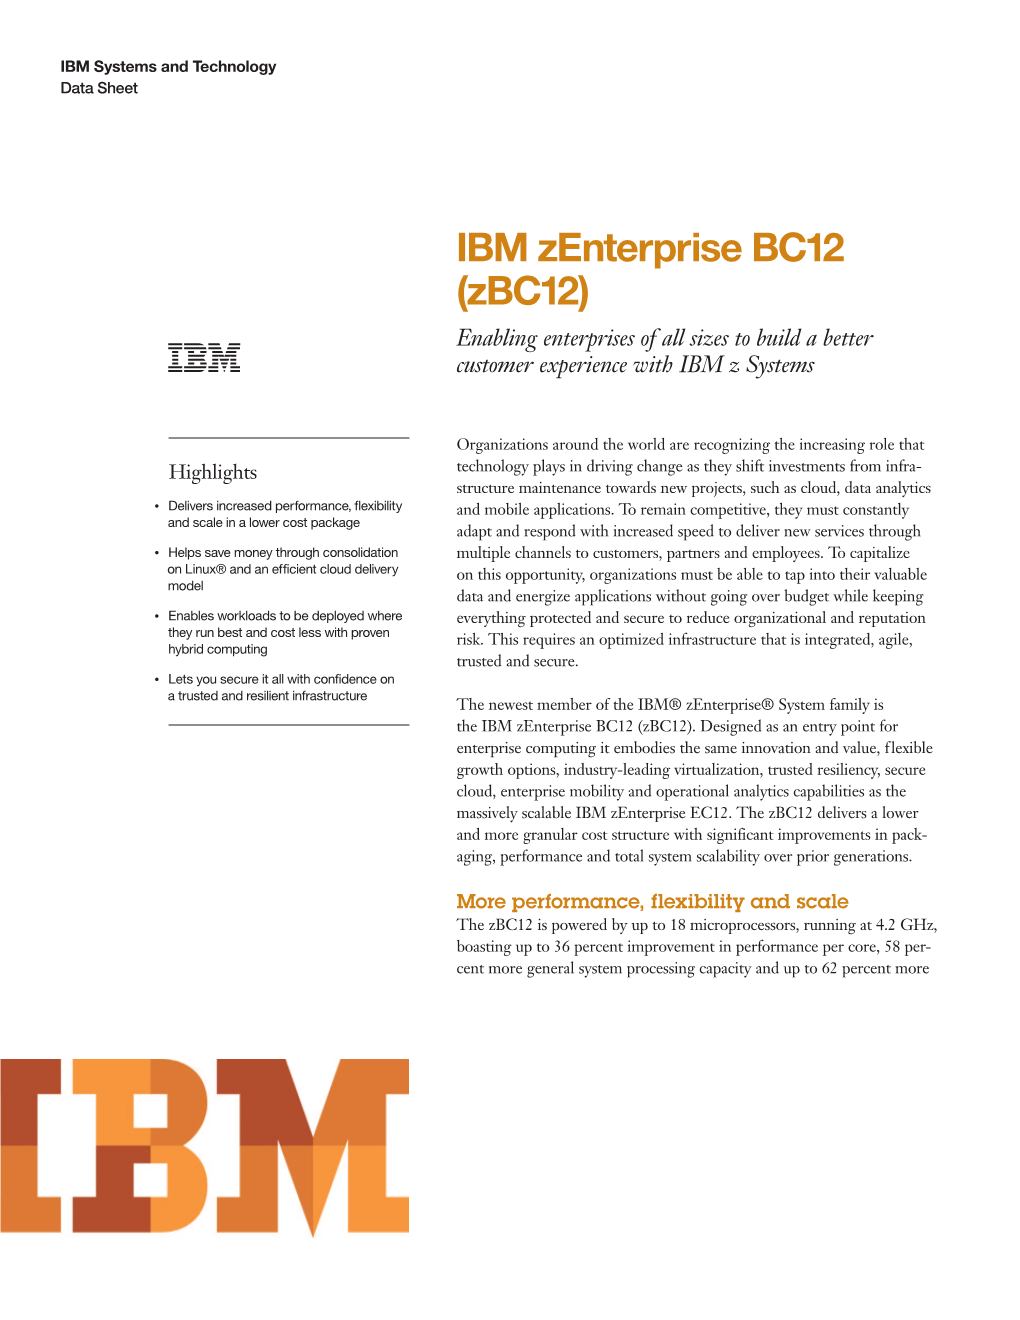 IBM Zenterprise BC12 (Zbc12) Enabling Enterprises of All Sizes to Build a Better Customer Experience with IBM Z Systems